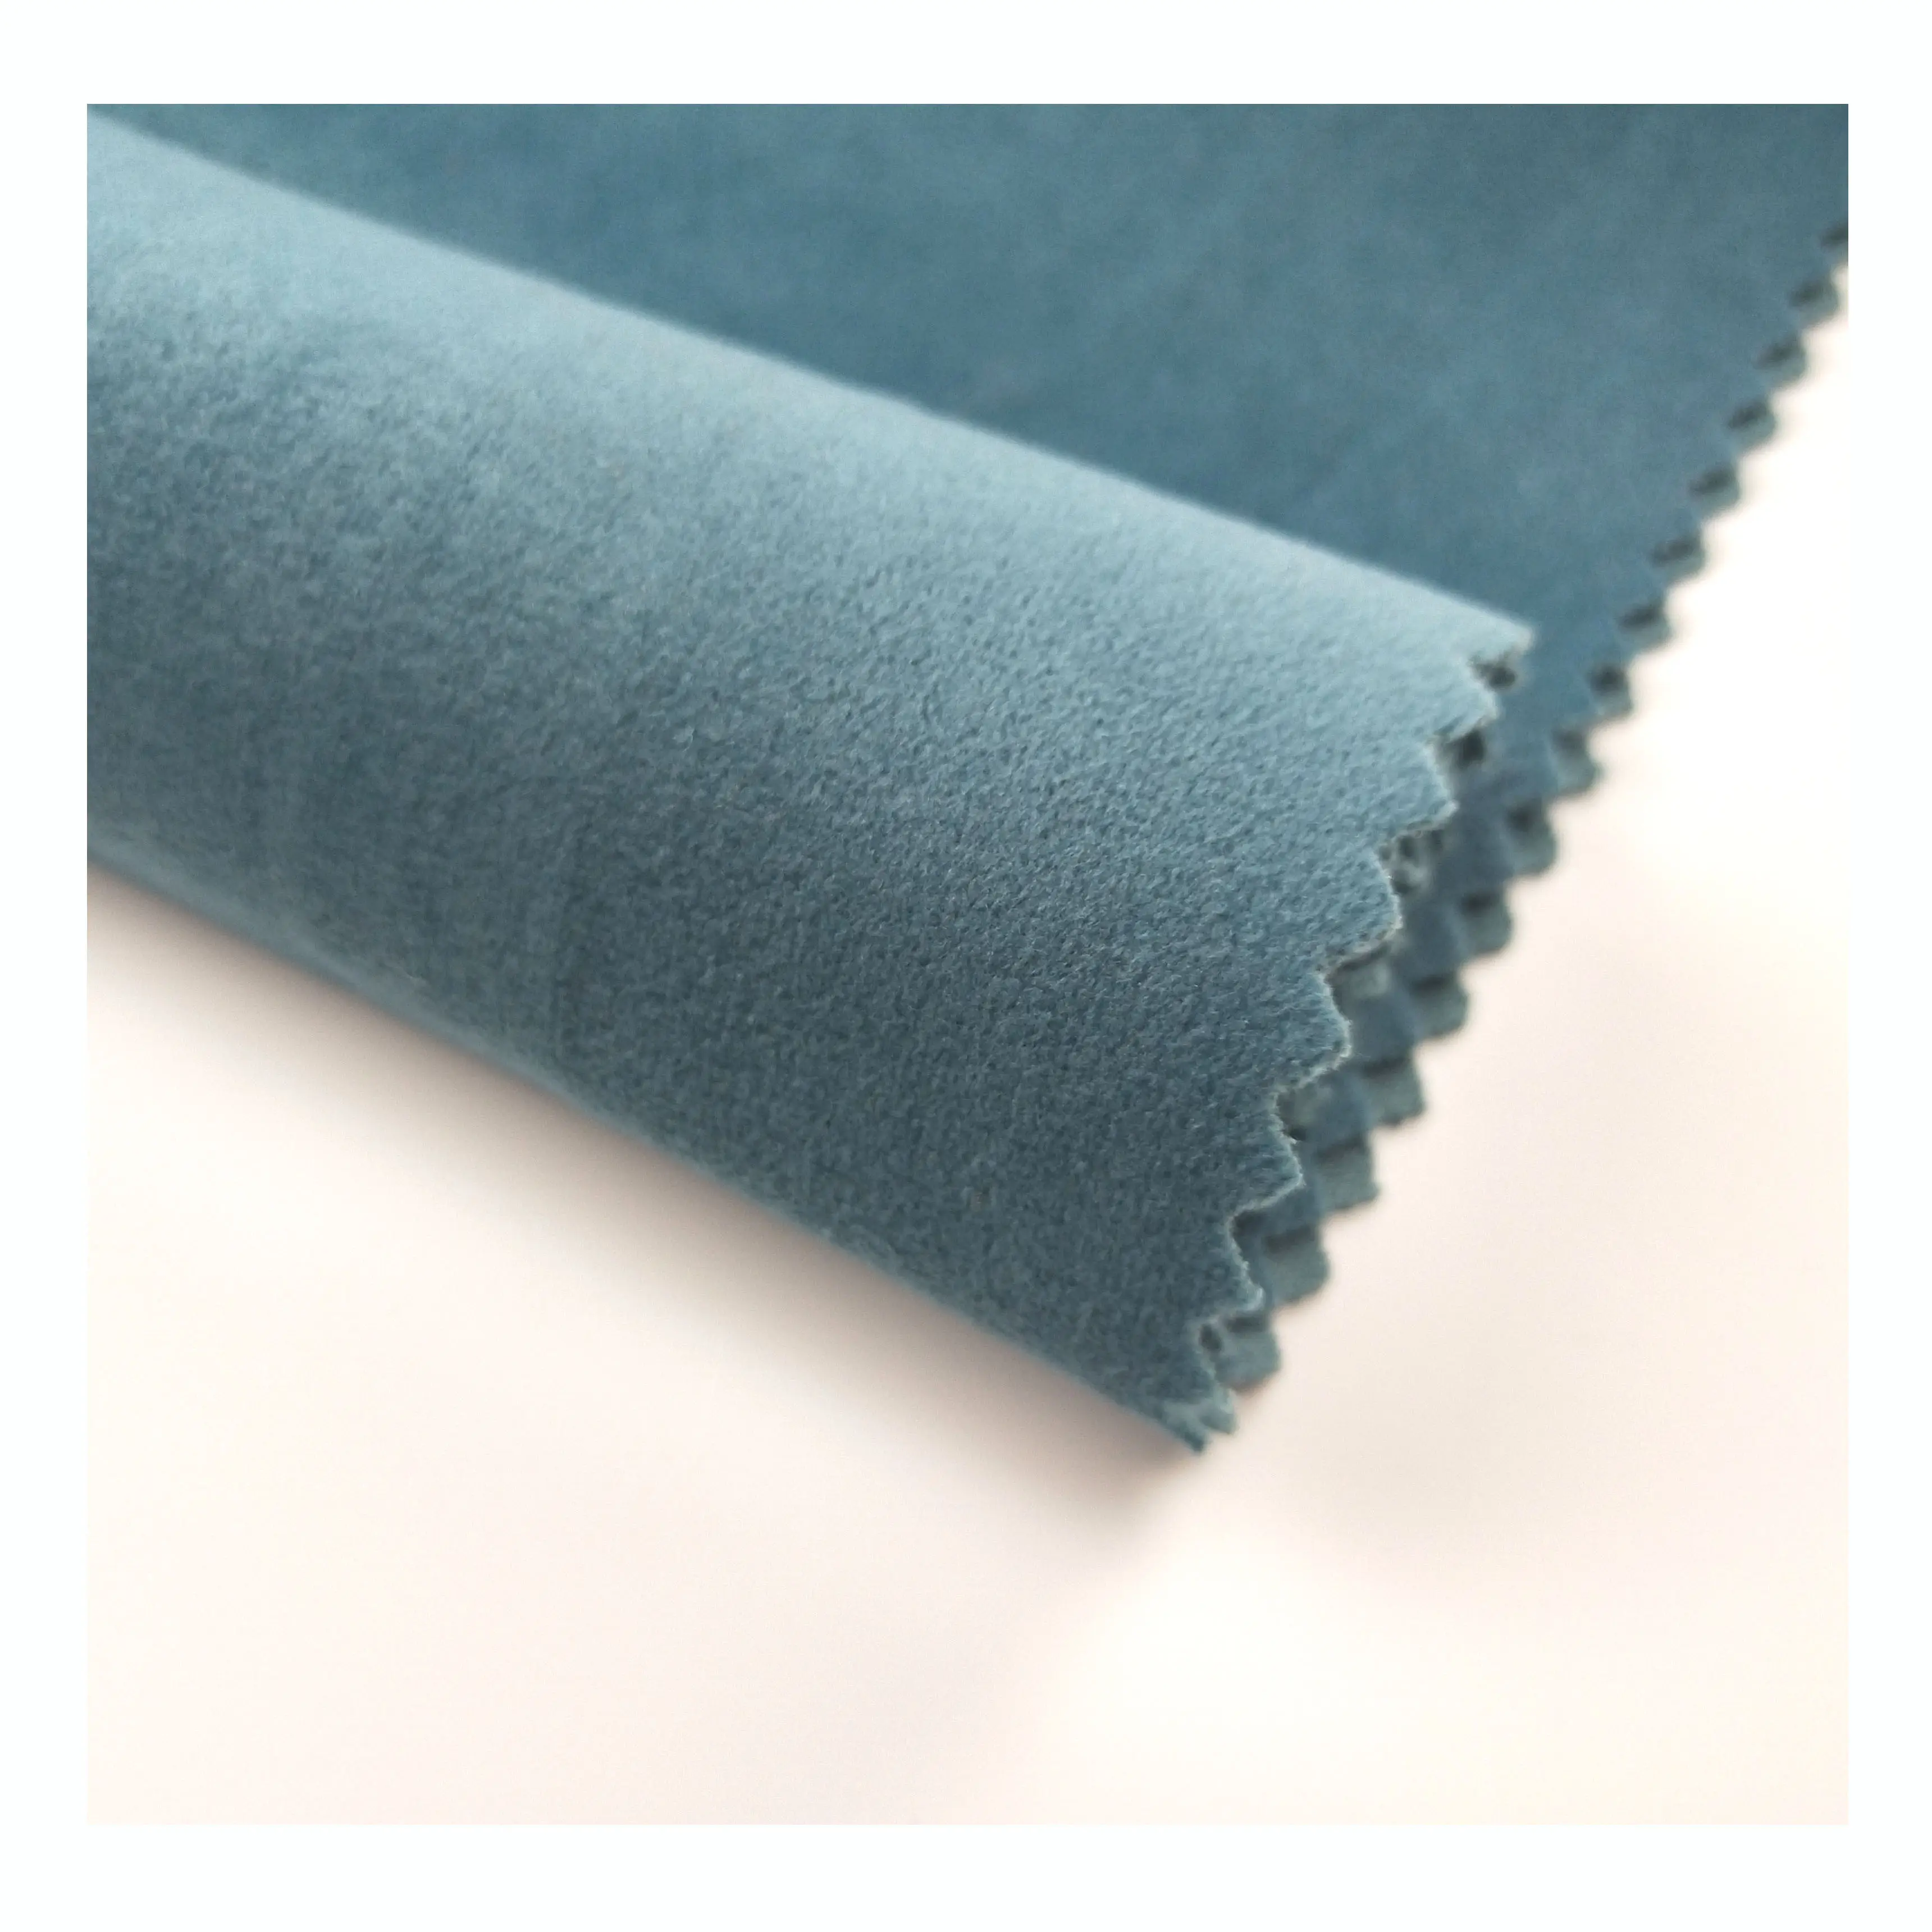 210 GSM Blue luxury textured upholstery fabric decorative sofa chair cloth manufacturer by the yard